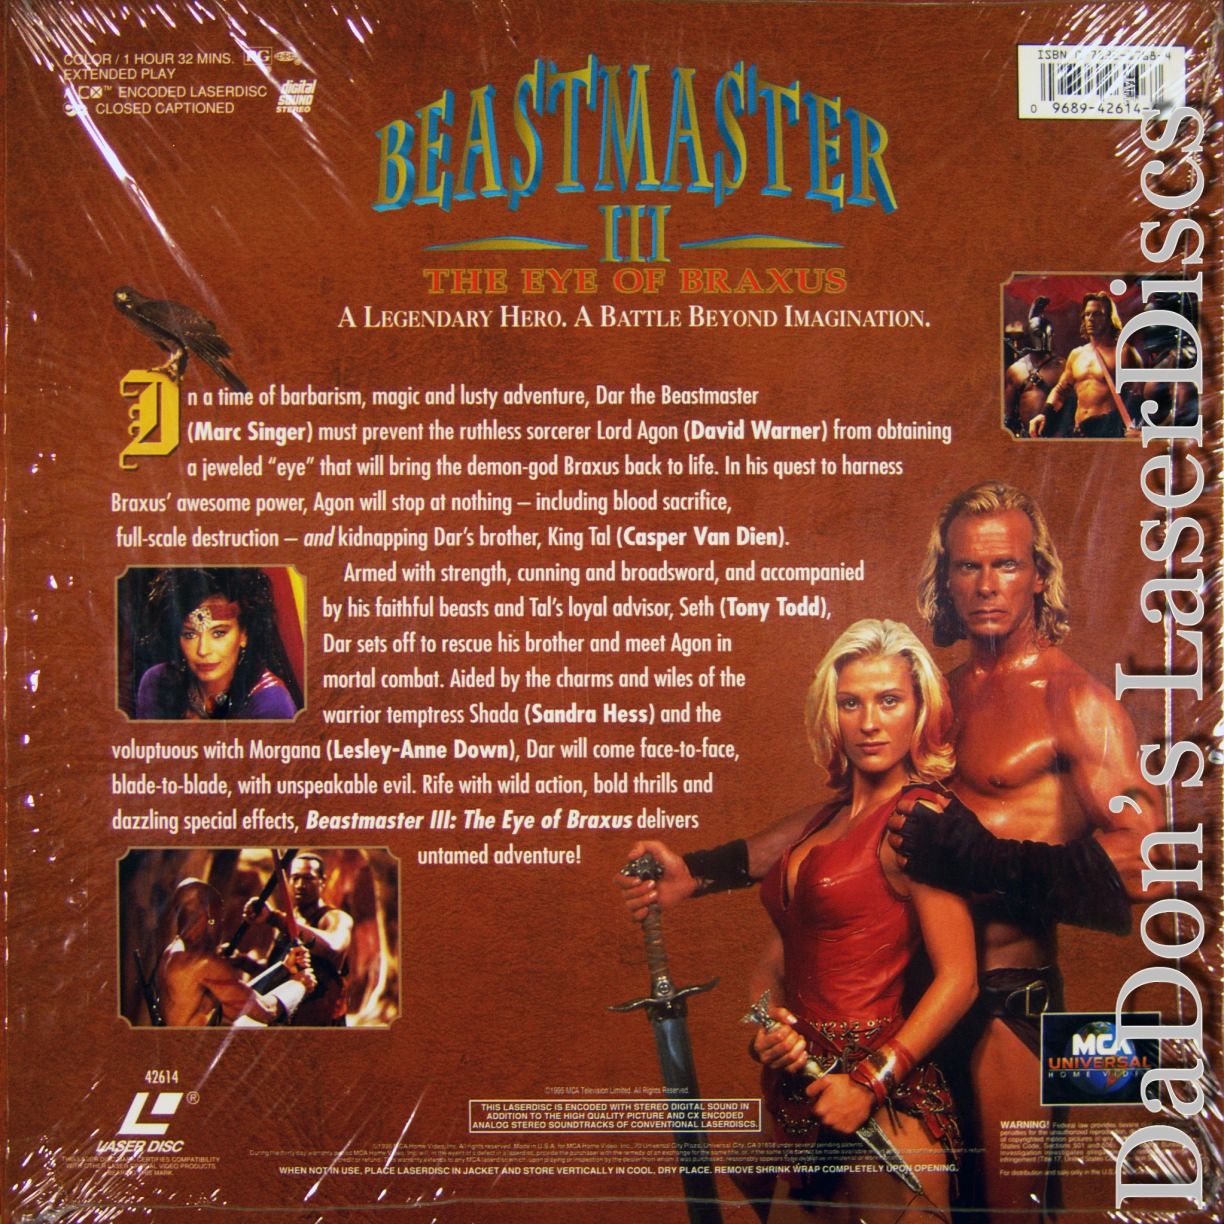 The Beastmaster 3